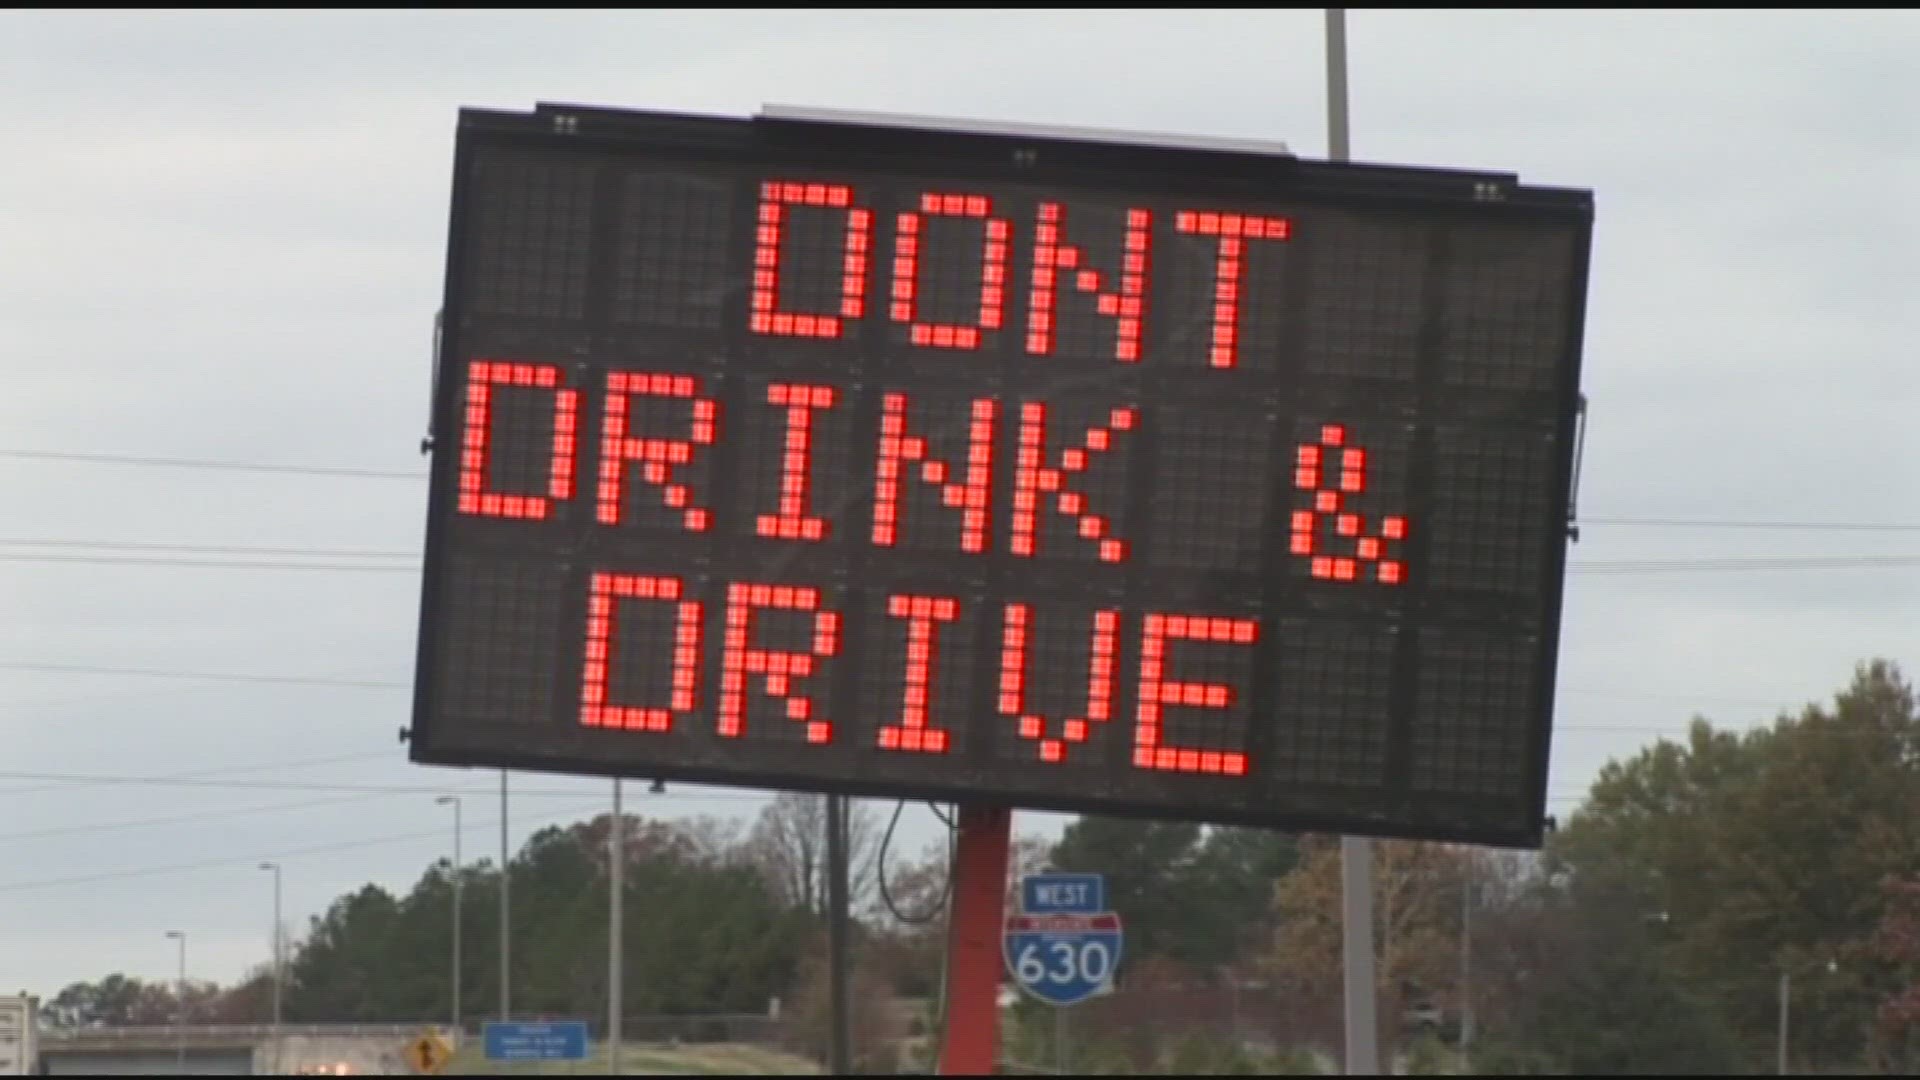 Police and transportation departments initiate a statewide focus on impaired driving prevention leading into Labor Day weekend.